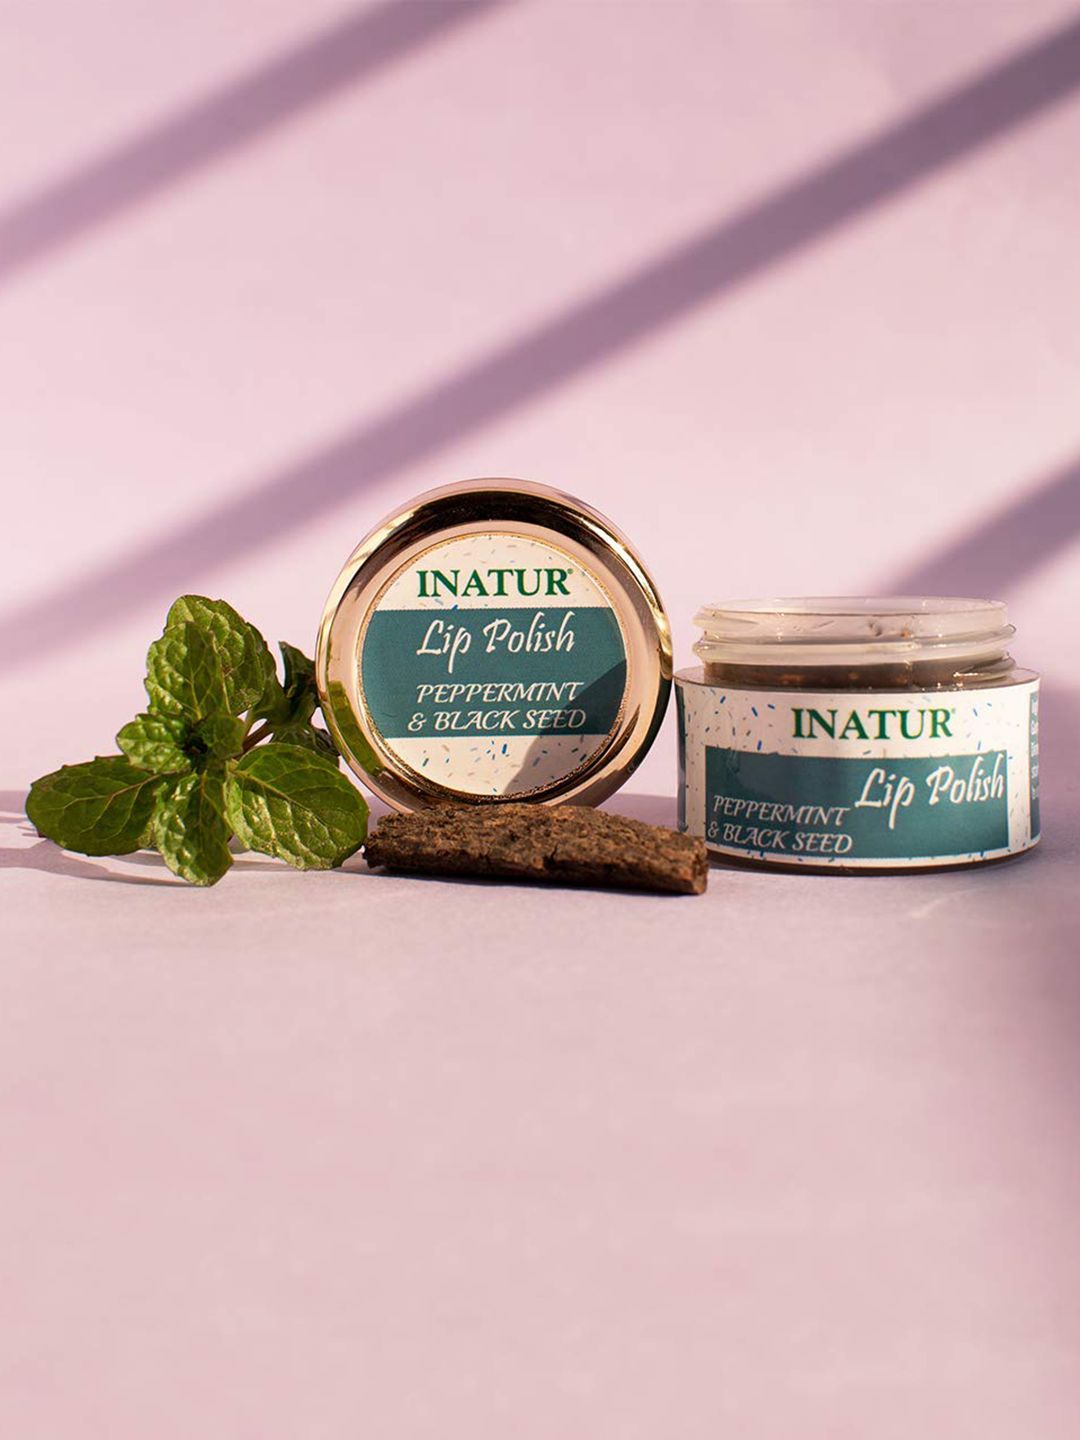 Inatur Peppermint & Black Seed Lip Polish 10 g Price in India